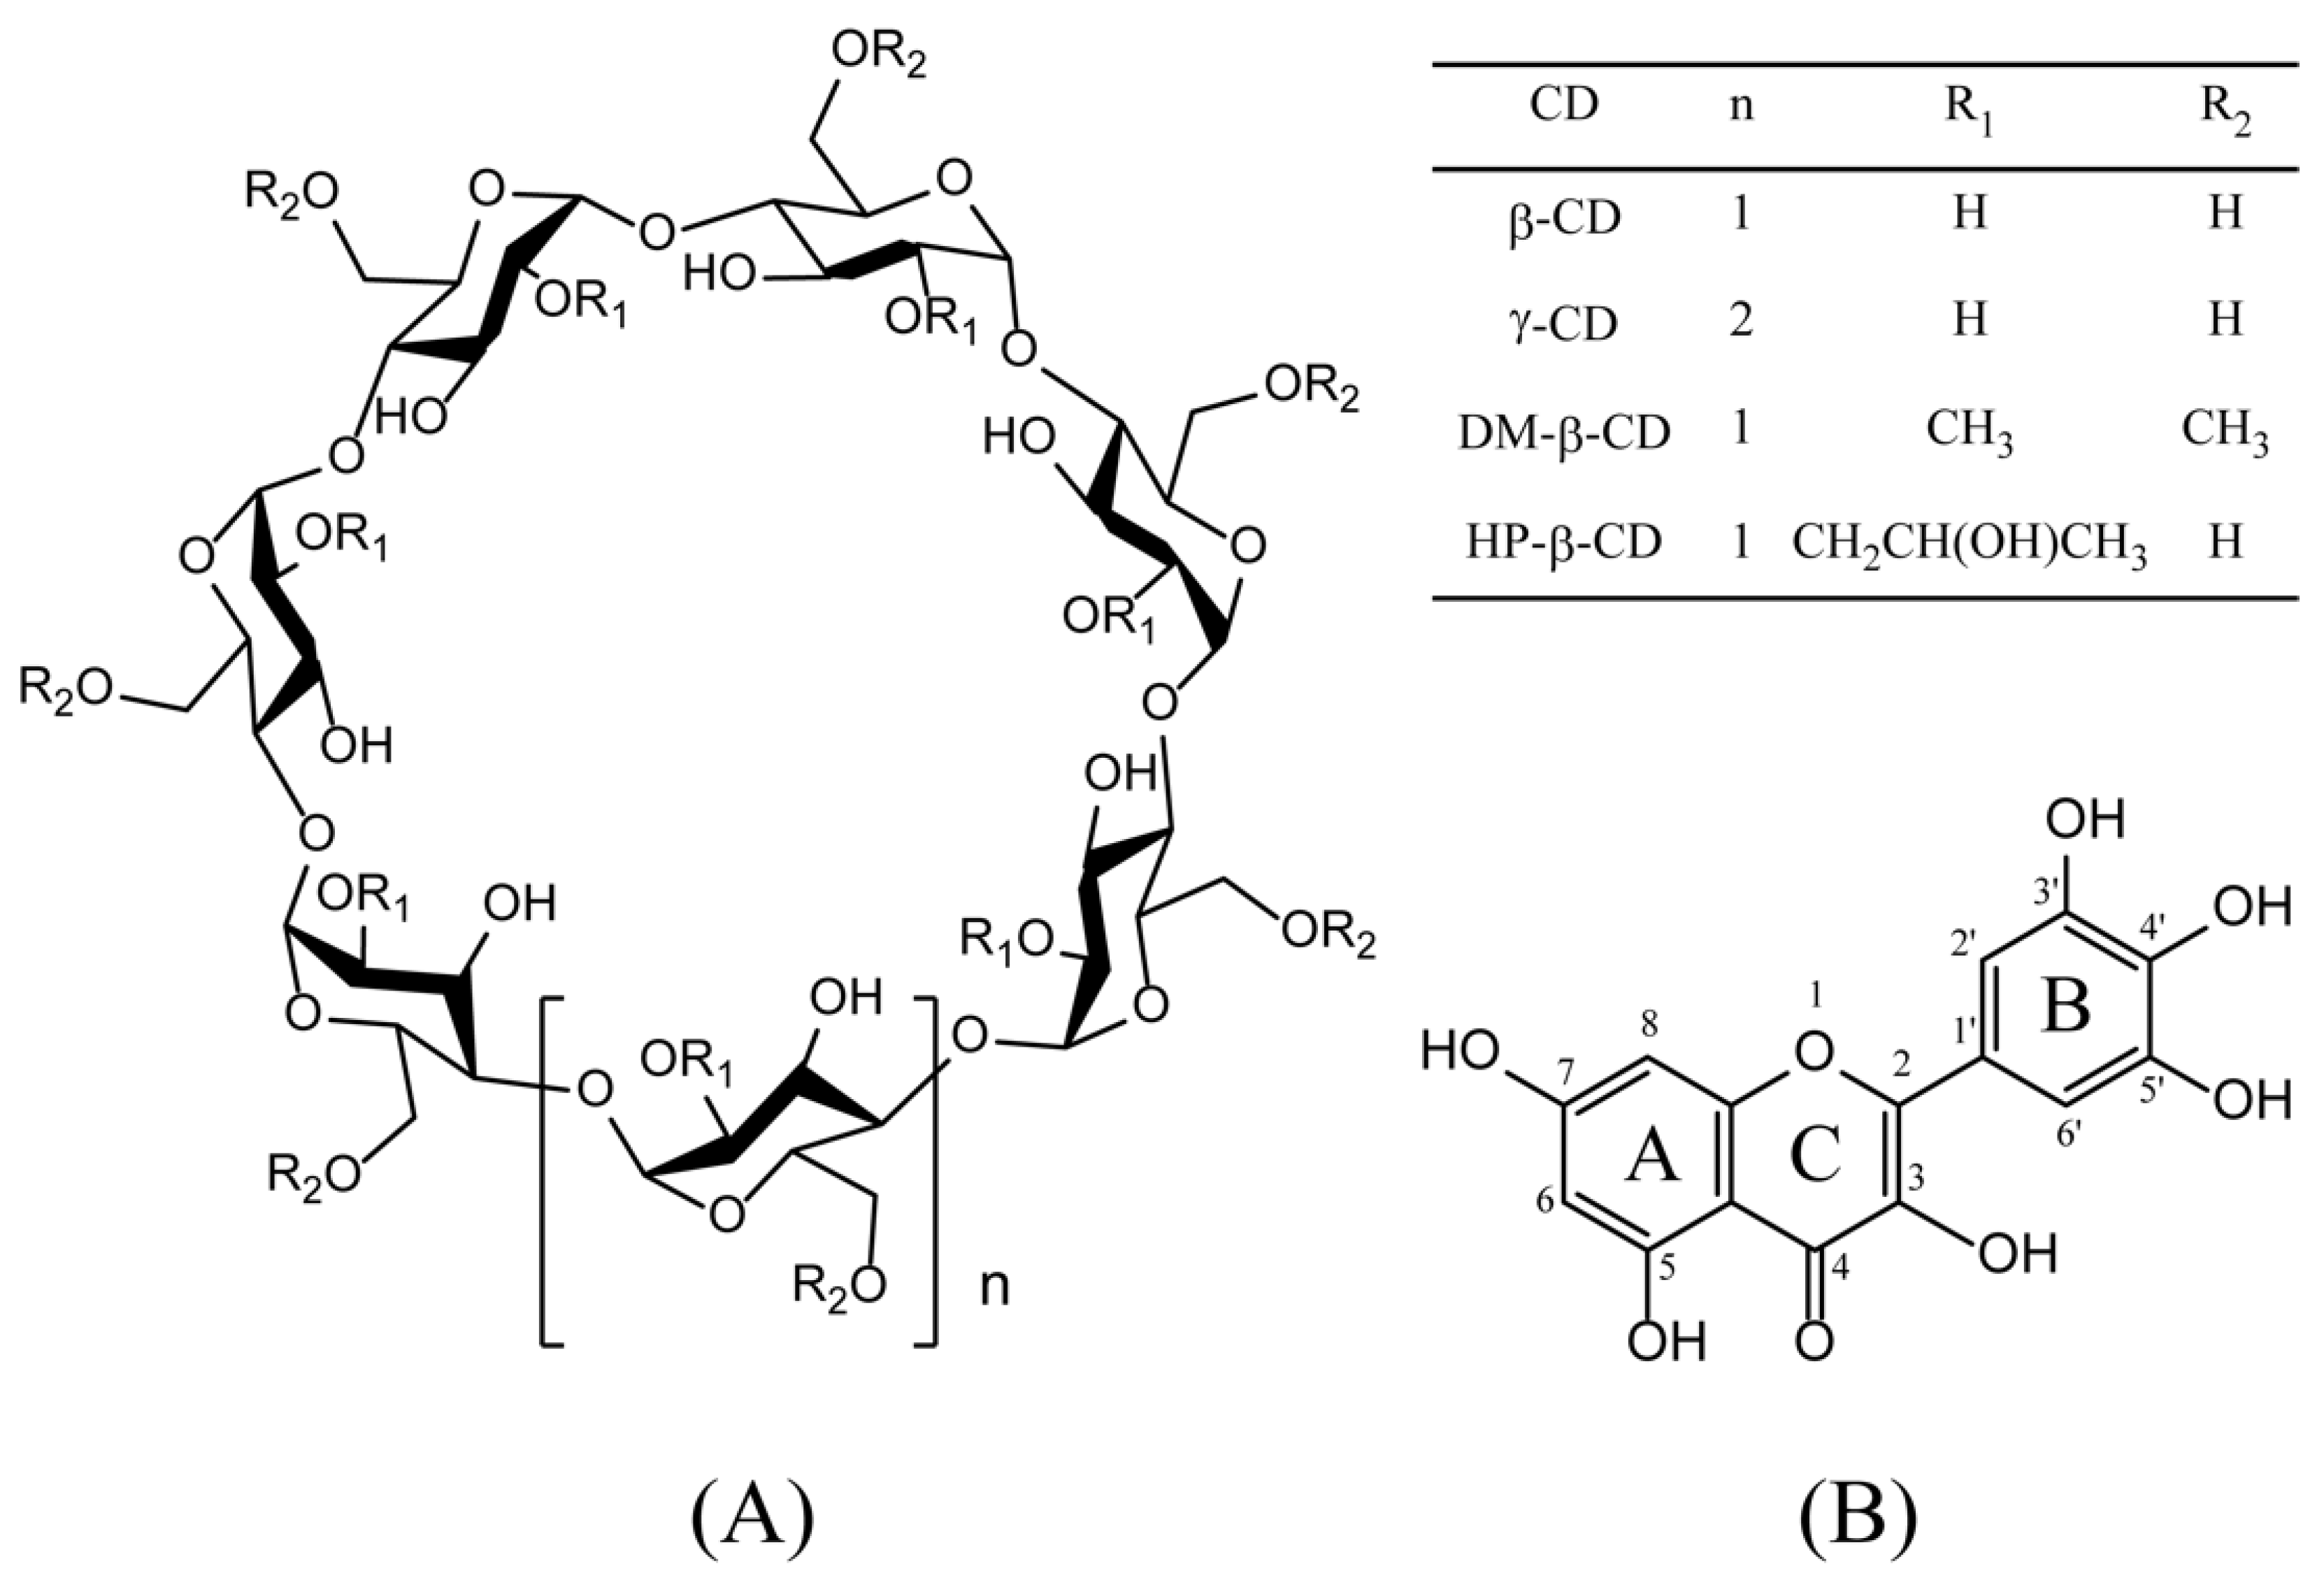 Ijms Free Full Text Solubility Enhancement Of Myricetin By Inclusion Complexation With Heptakis O 2 Hydroxypropyl B Cyclodextrin A Joint Experimental And Theoretical Study Html